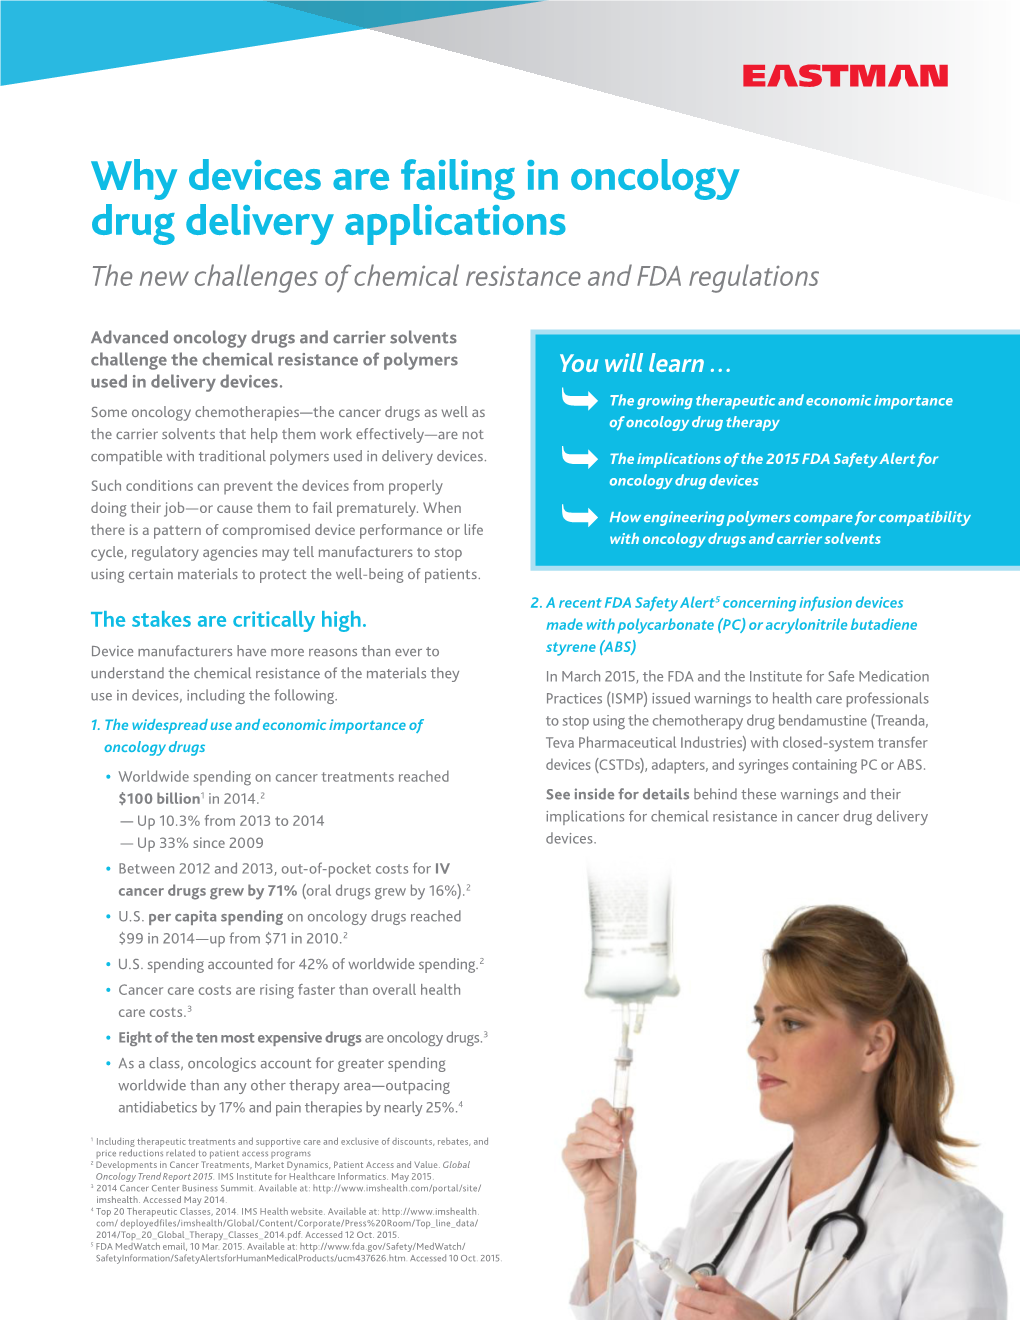 Why Devices Are Failing in Oncology Drug Delivery Applications the New Challenges of Chemical Resistance and FDA Regulations